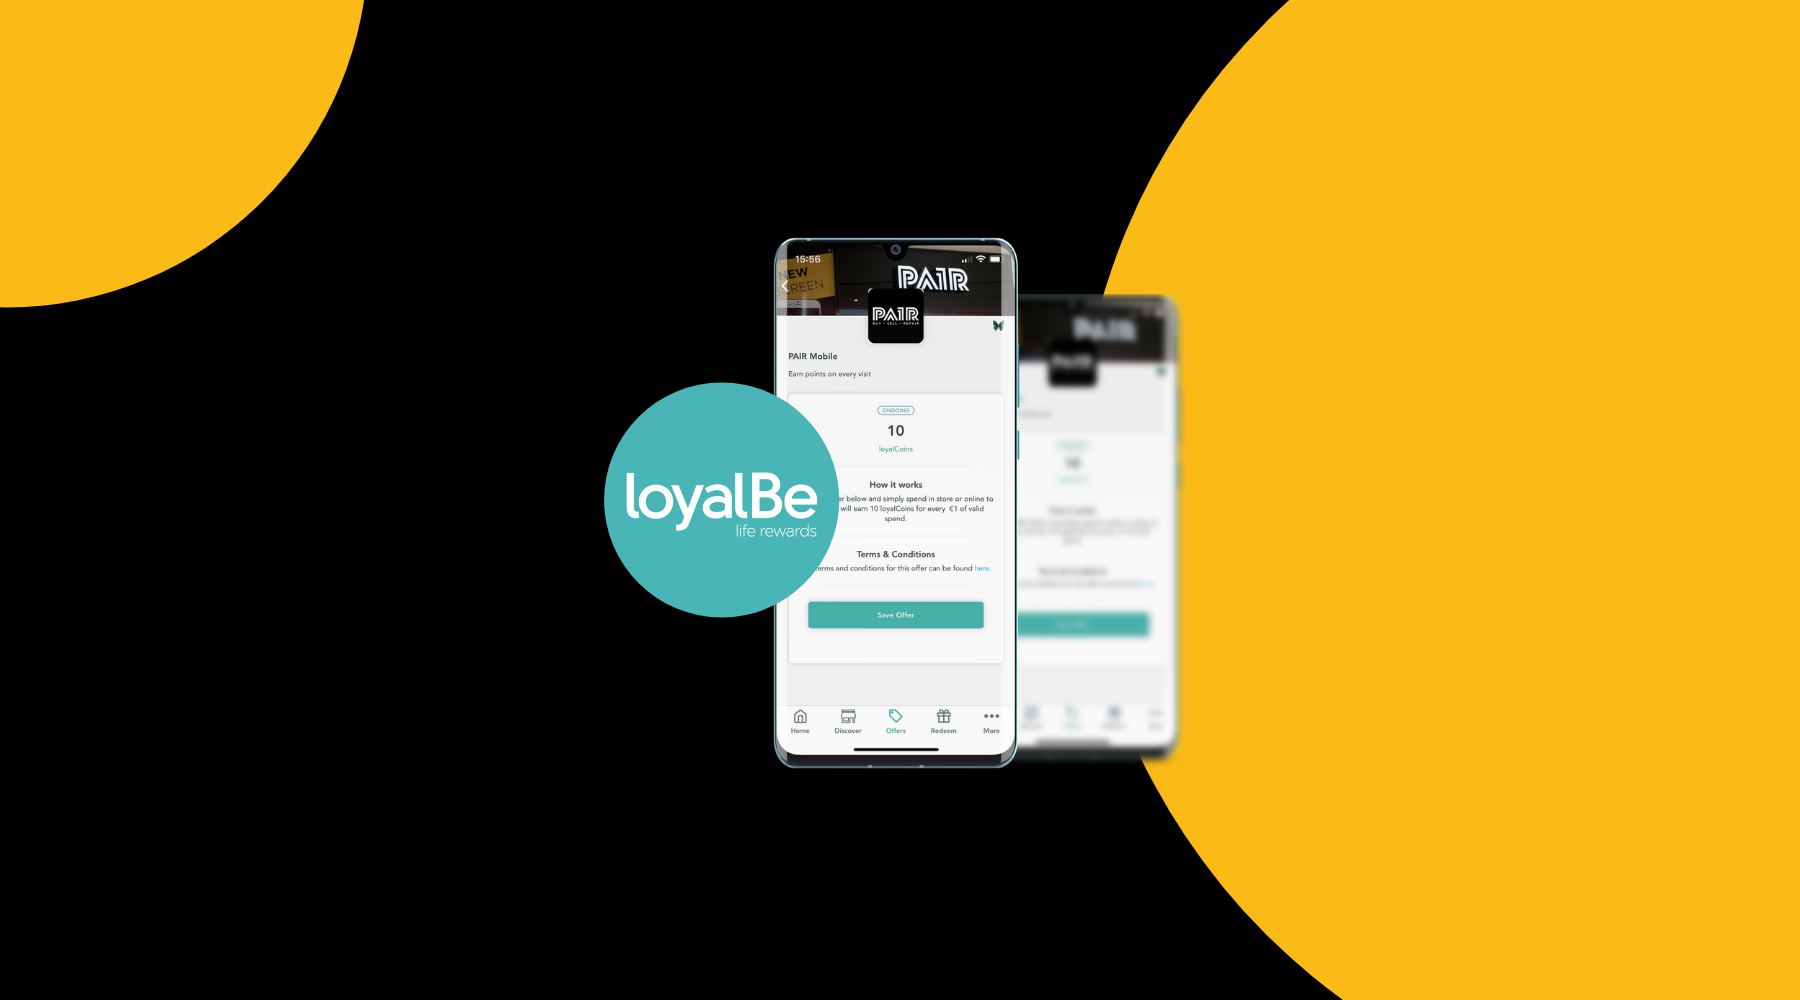 Earn Loyalty Points with loyalBe